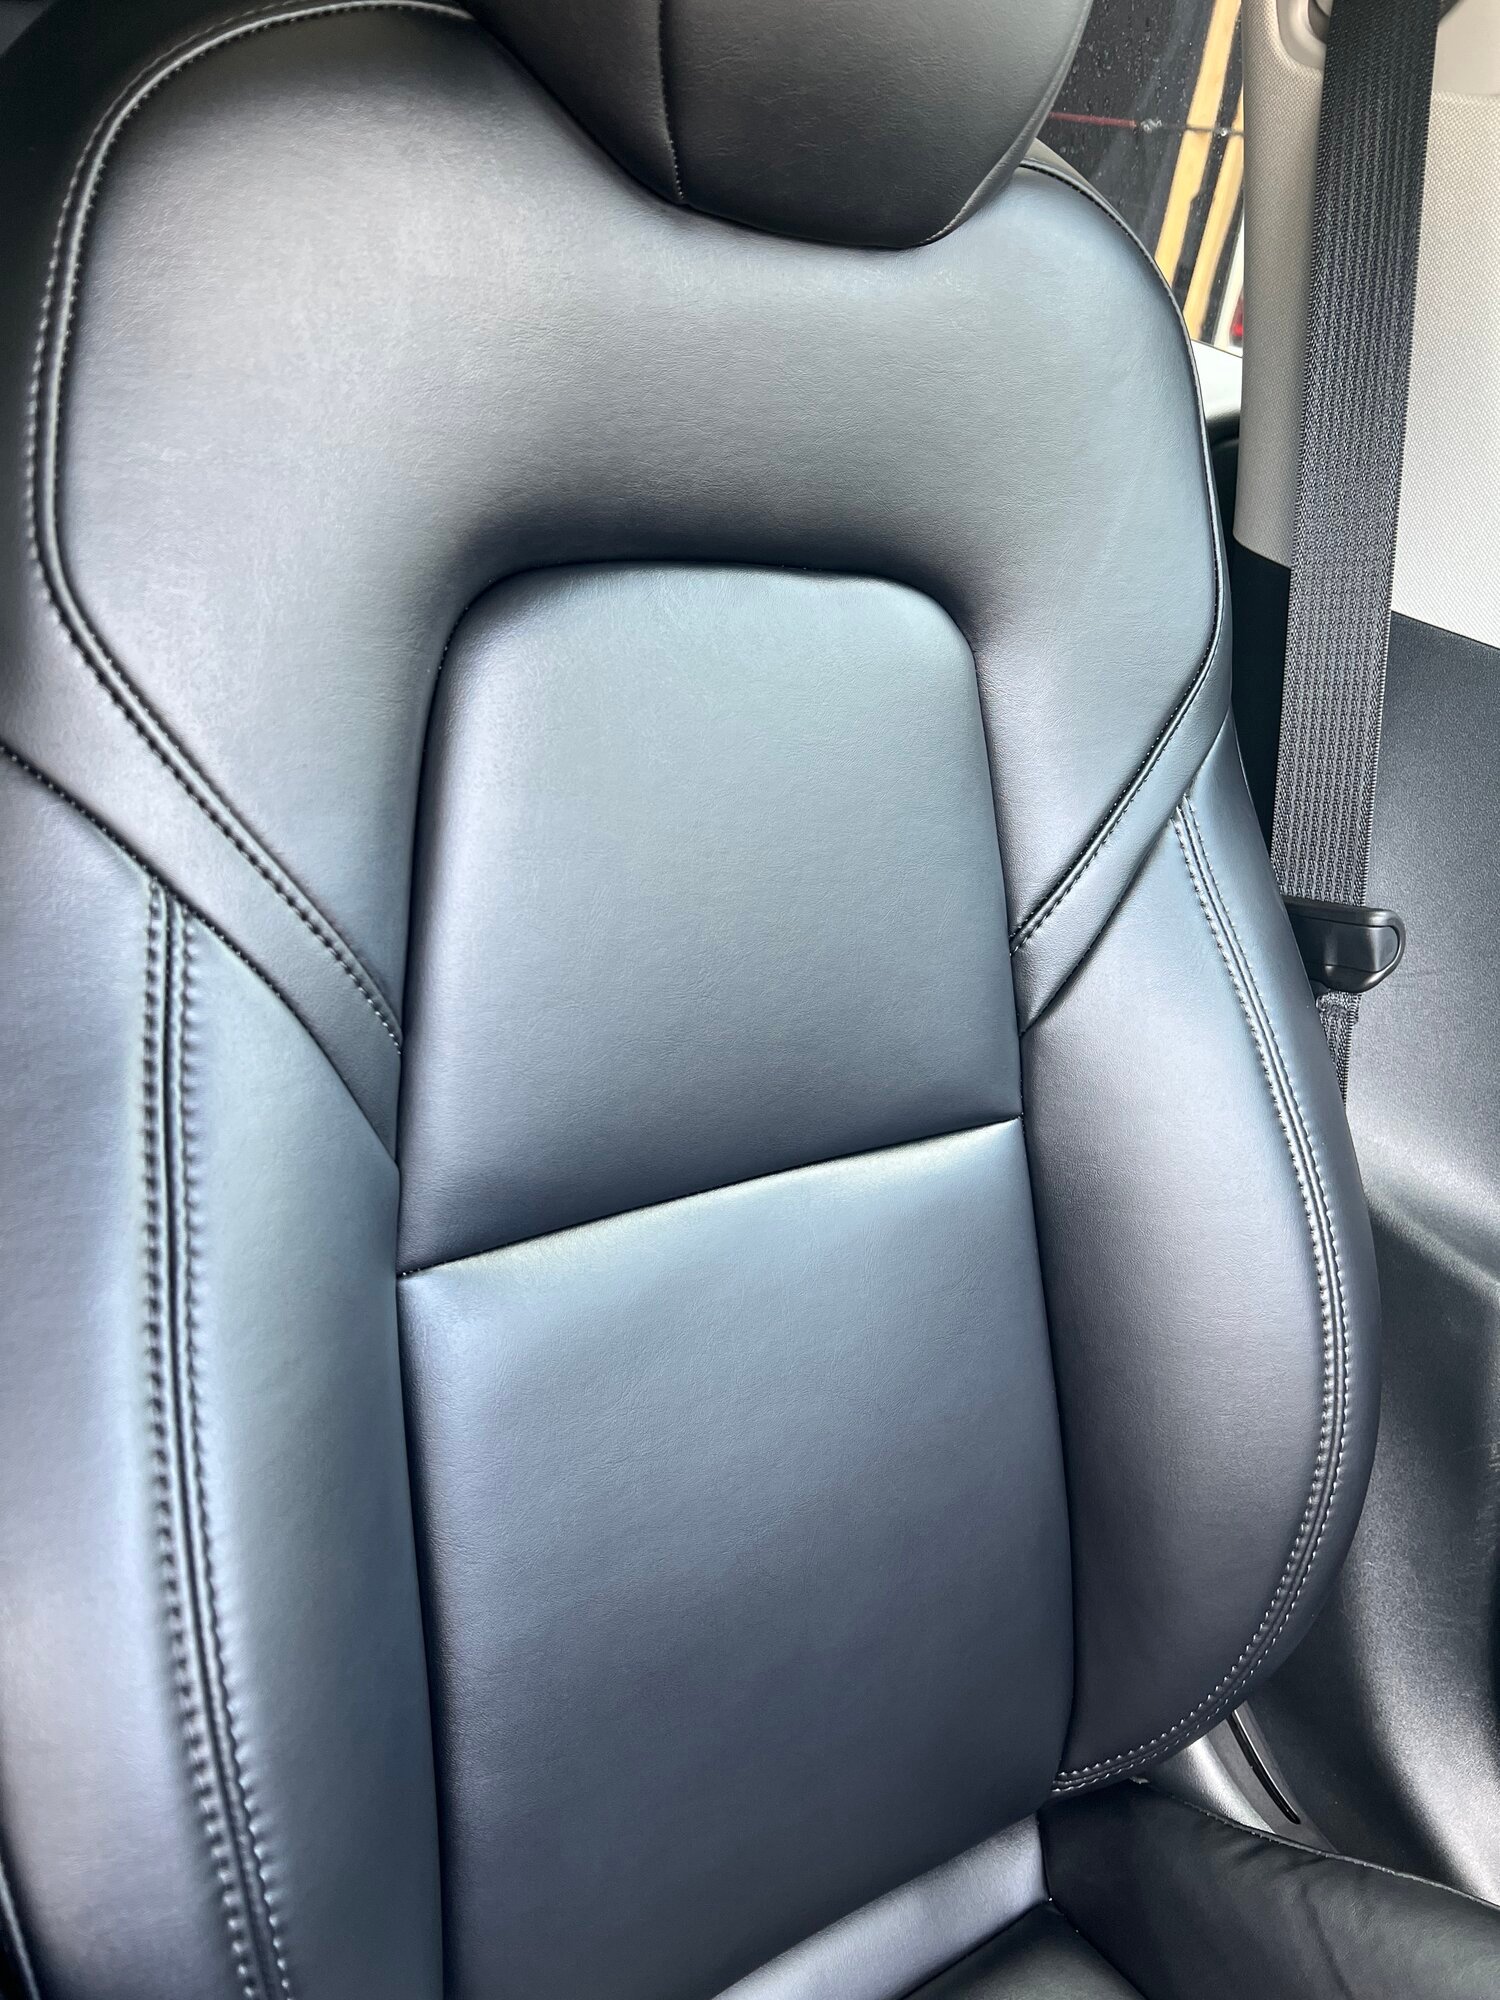 HELP! I used leather care wipes in my model 3! : r/TeslaModel3